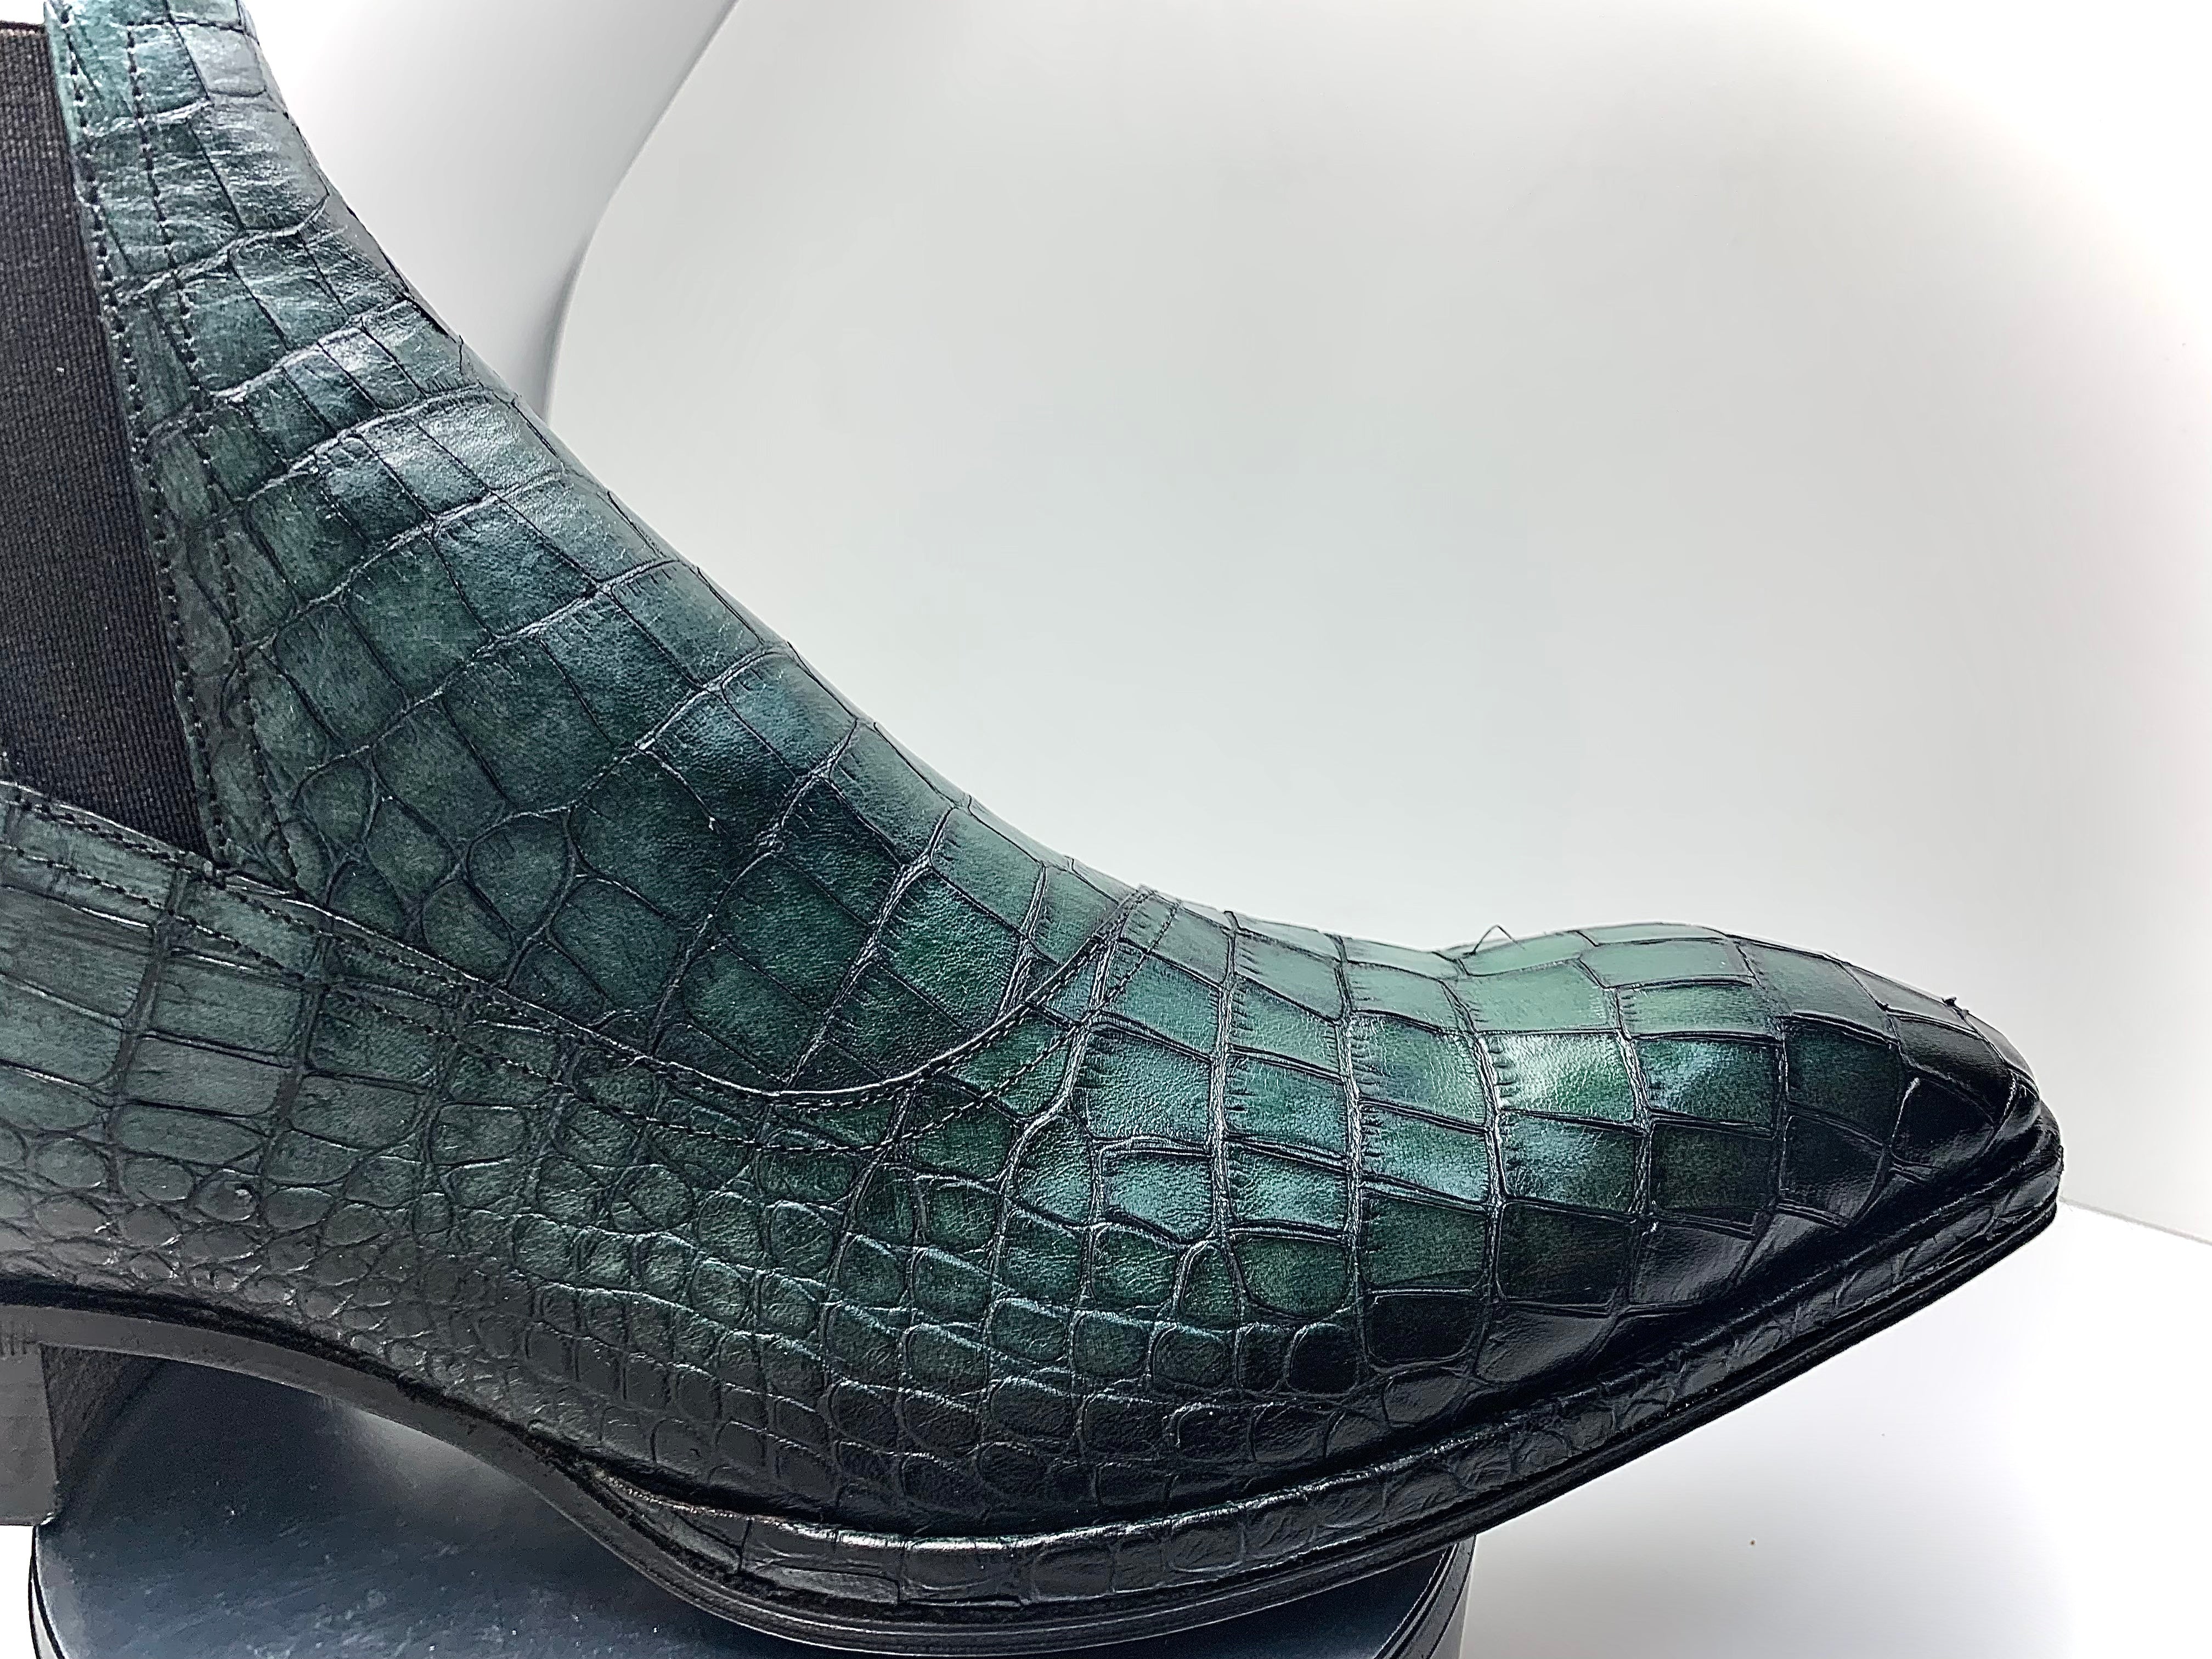 Stitch by Stich Green Croc Embossed Boot